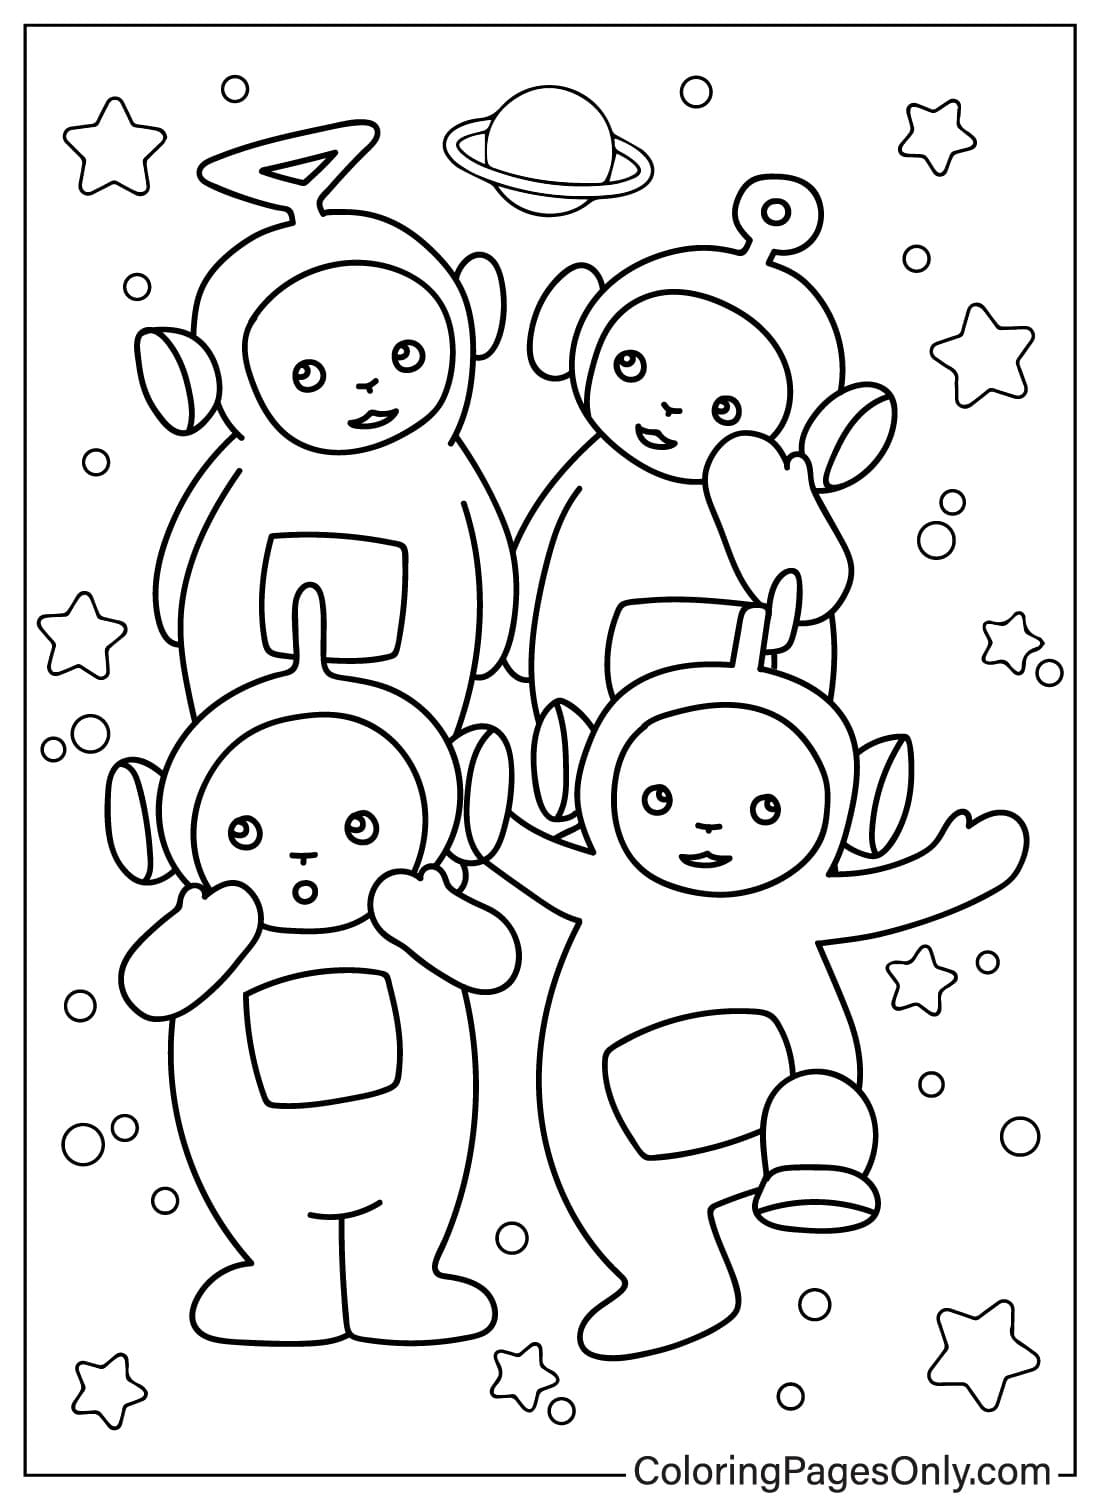 Teletubbies – WildBrain Coloring Pages to Printable from Teletubbies - WildBrain